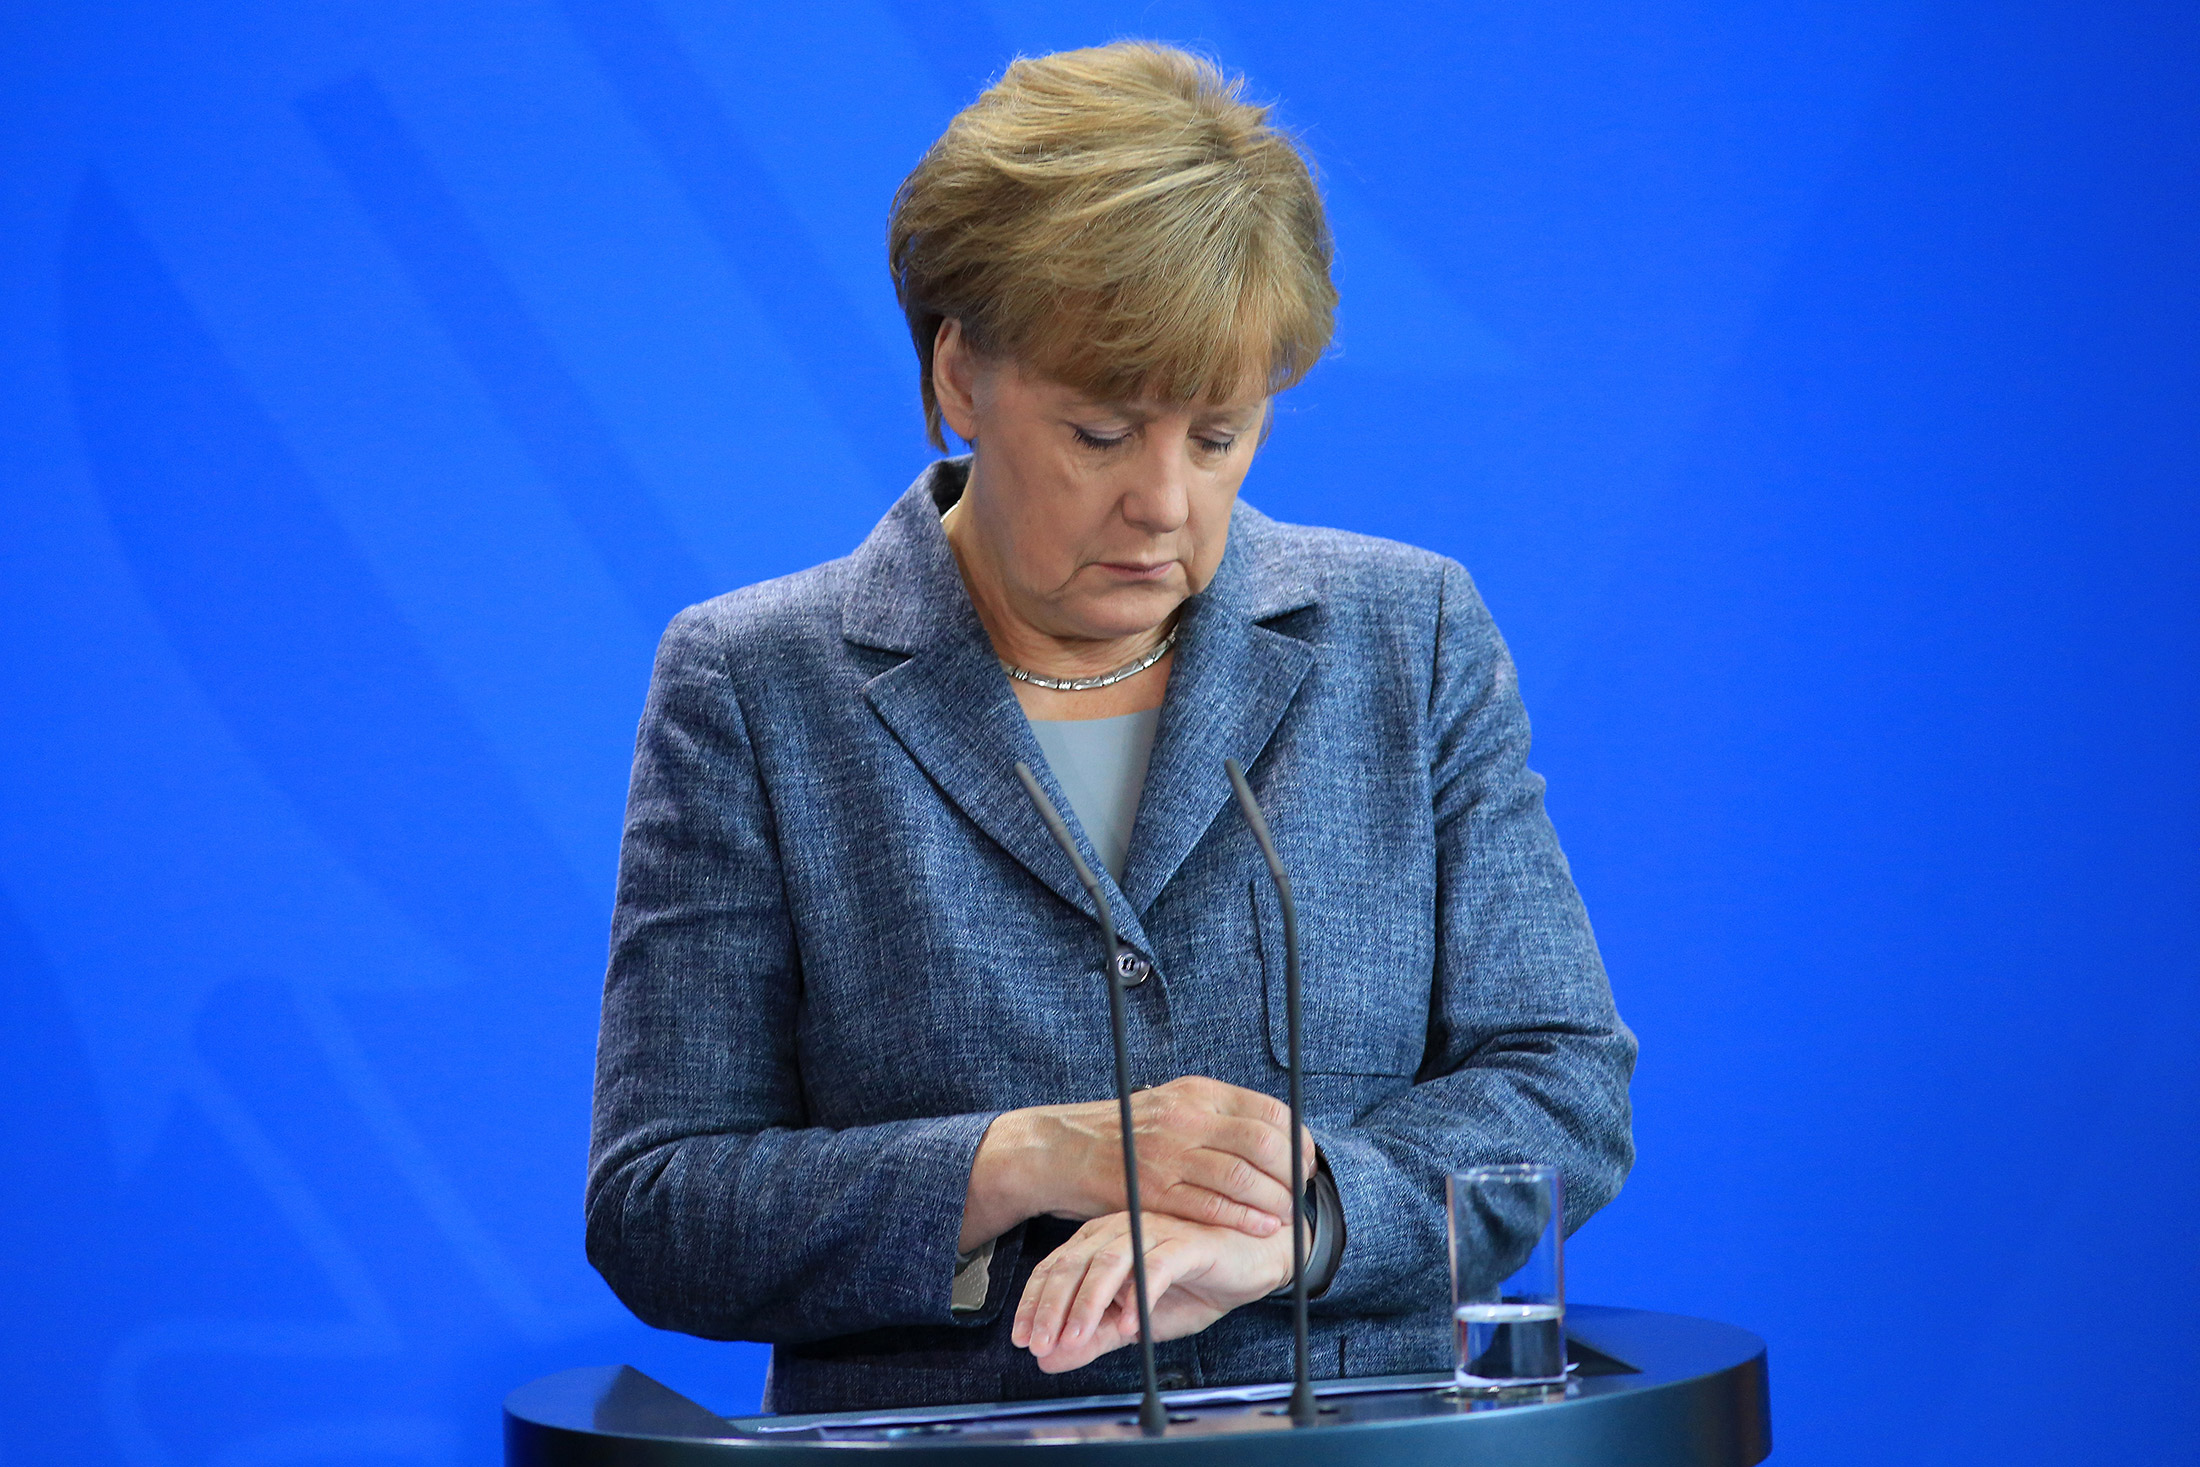 Angela Merkel, Germany's chancellor, looks at her wristwatch during a news conference at the Chancellery in Berlin, Germany, on Monday, Sept. 7, 2015.
